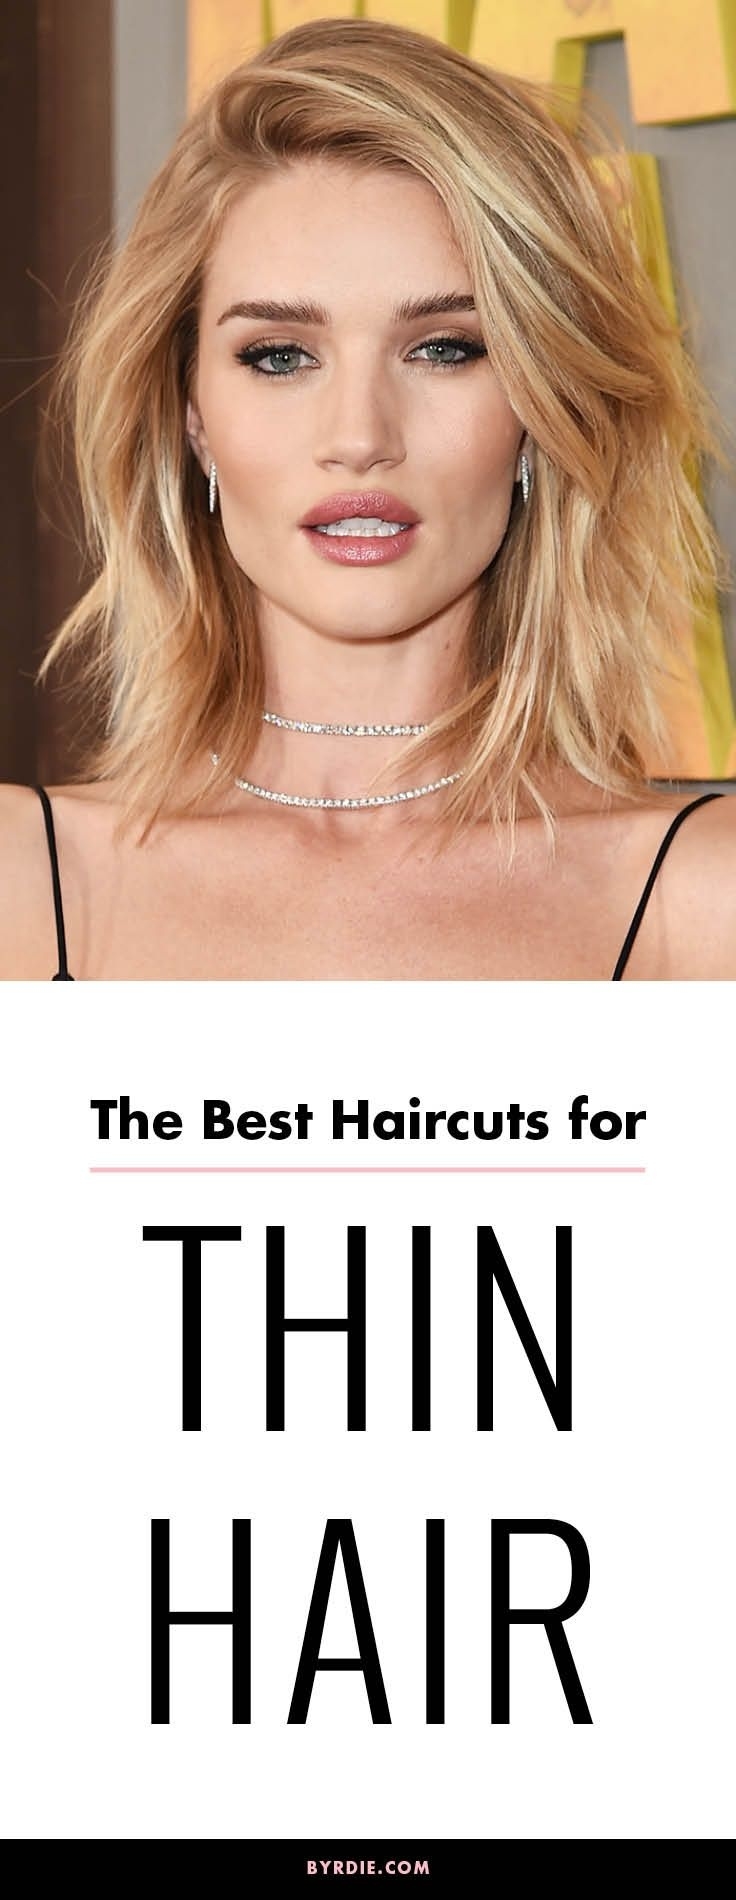 It's Official: These Are The All-Time Best Haircuts For Thin Hair regarding Haircut For Thin Hair On Top